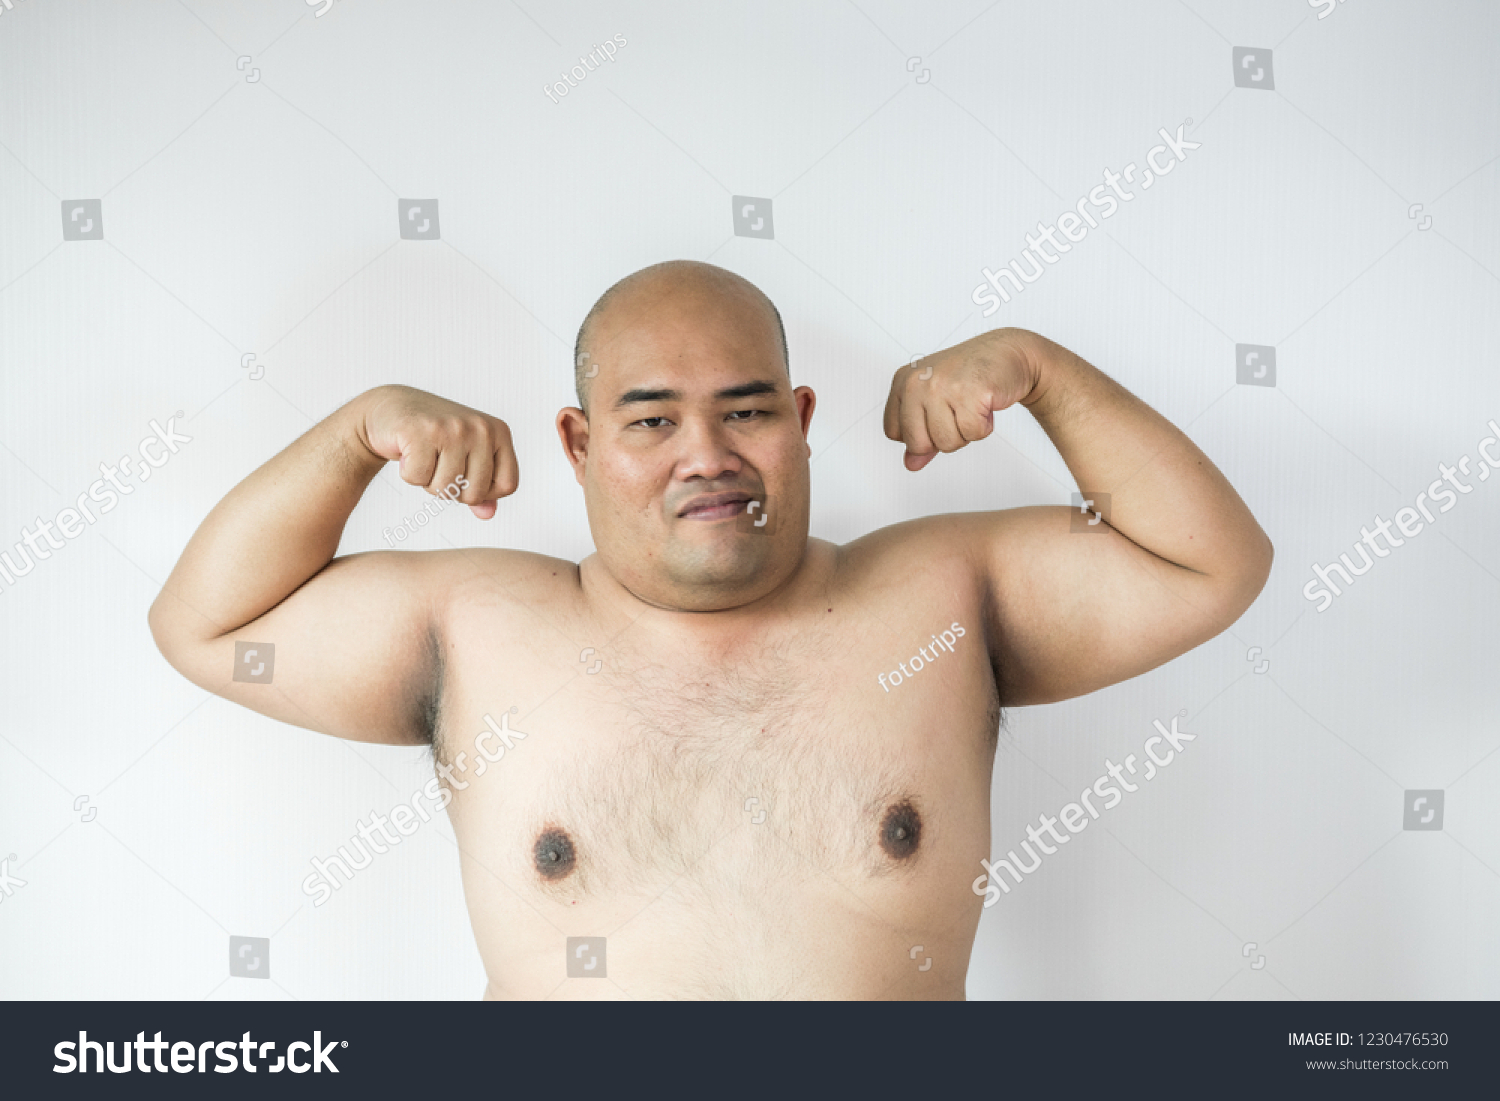 Fat Man Overweight Man Big Belly Stock Image Download Now